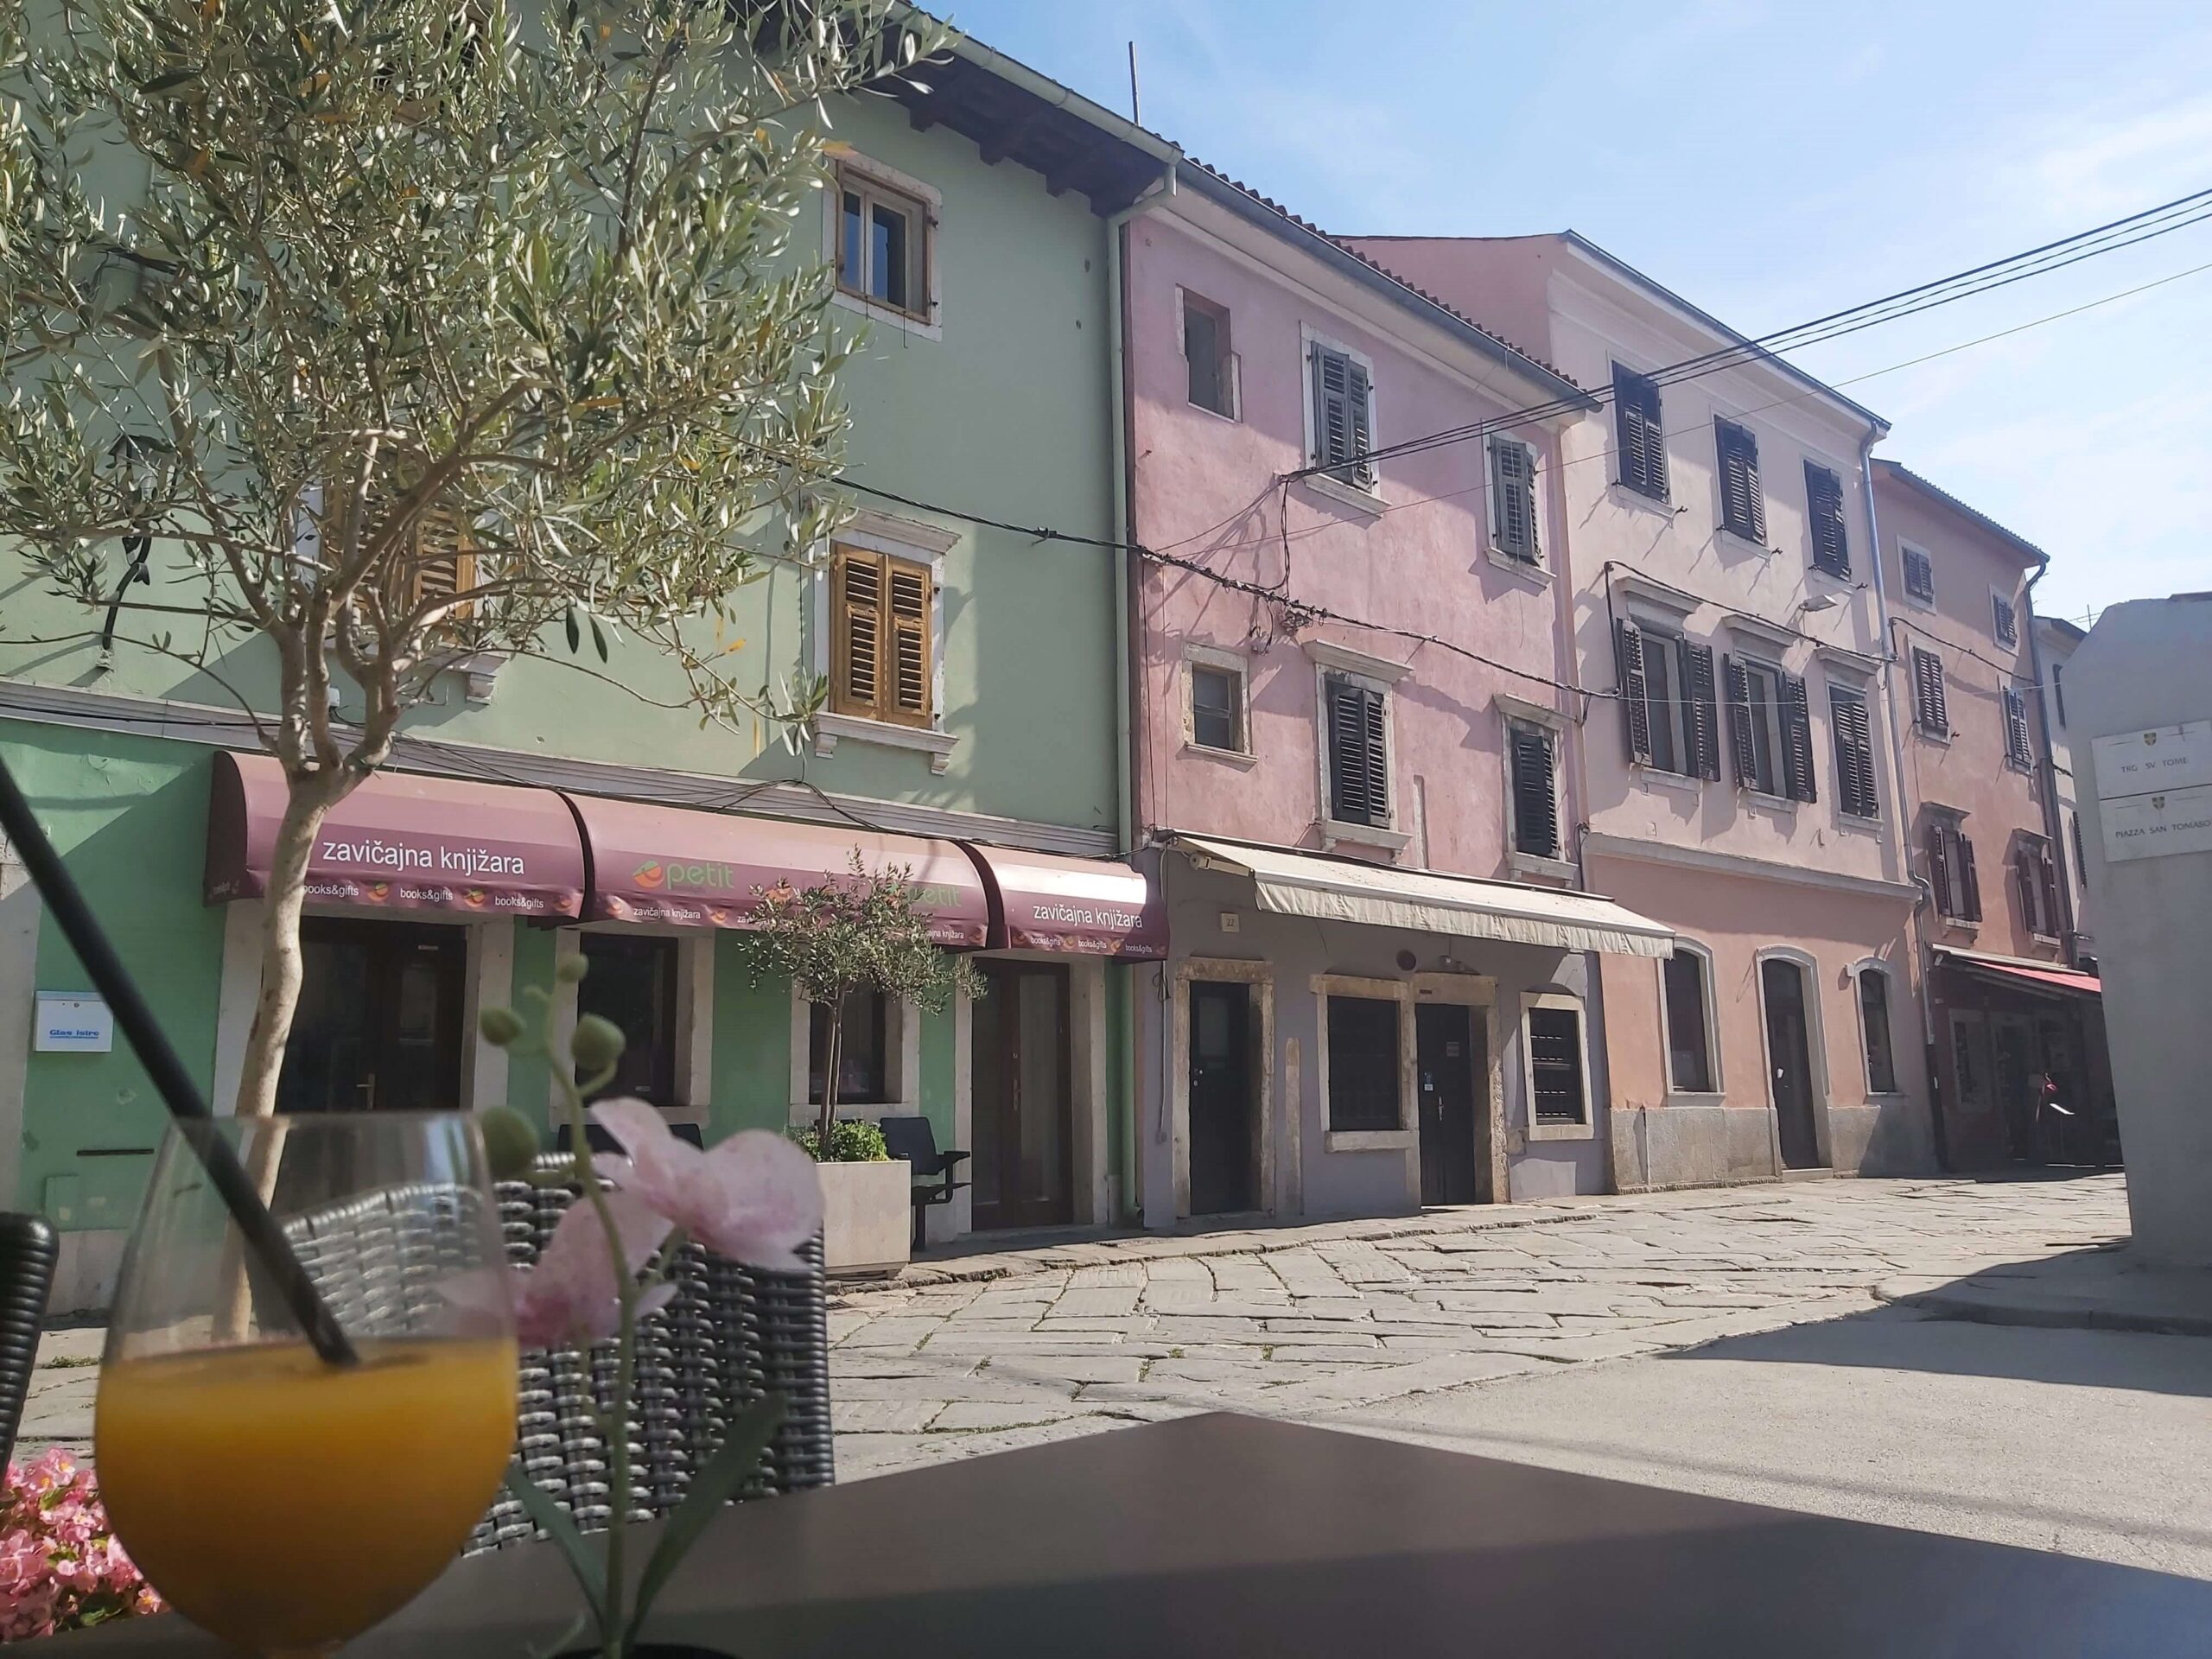 Green and pink buildings dominate a street view in Pula, Croatia